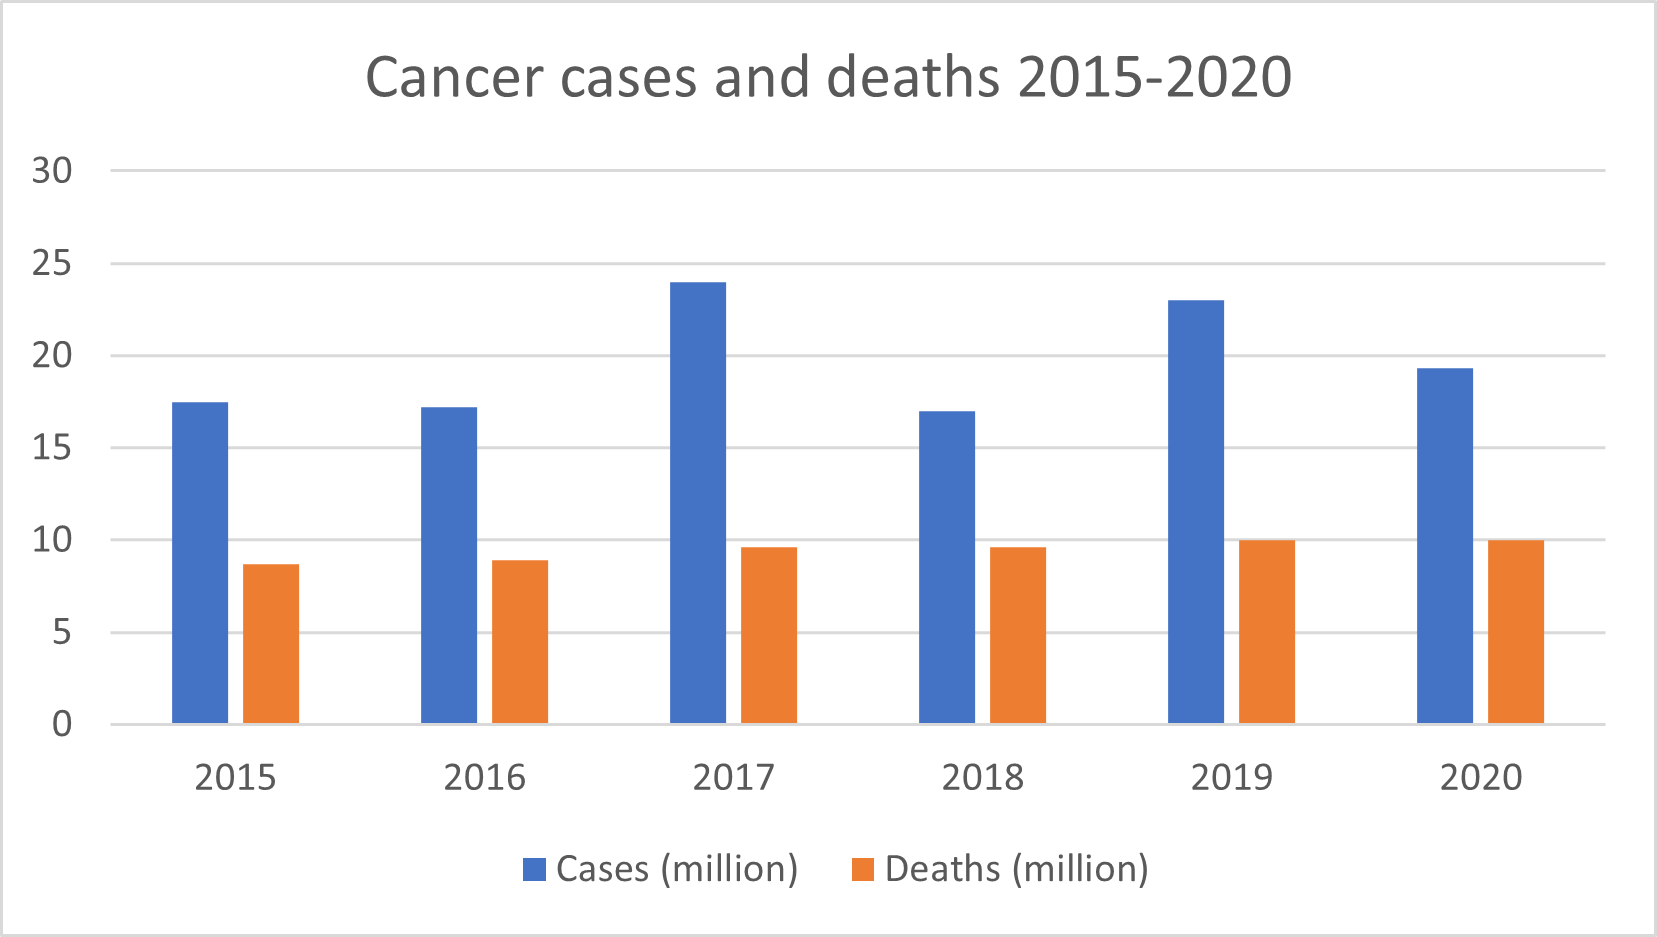 Number of cancer cases and deaths over the years